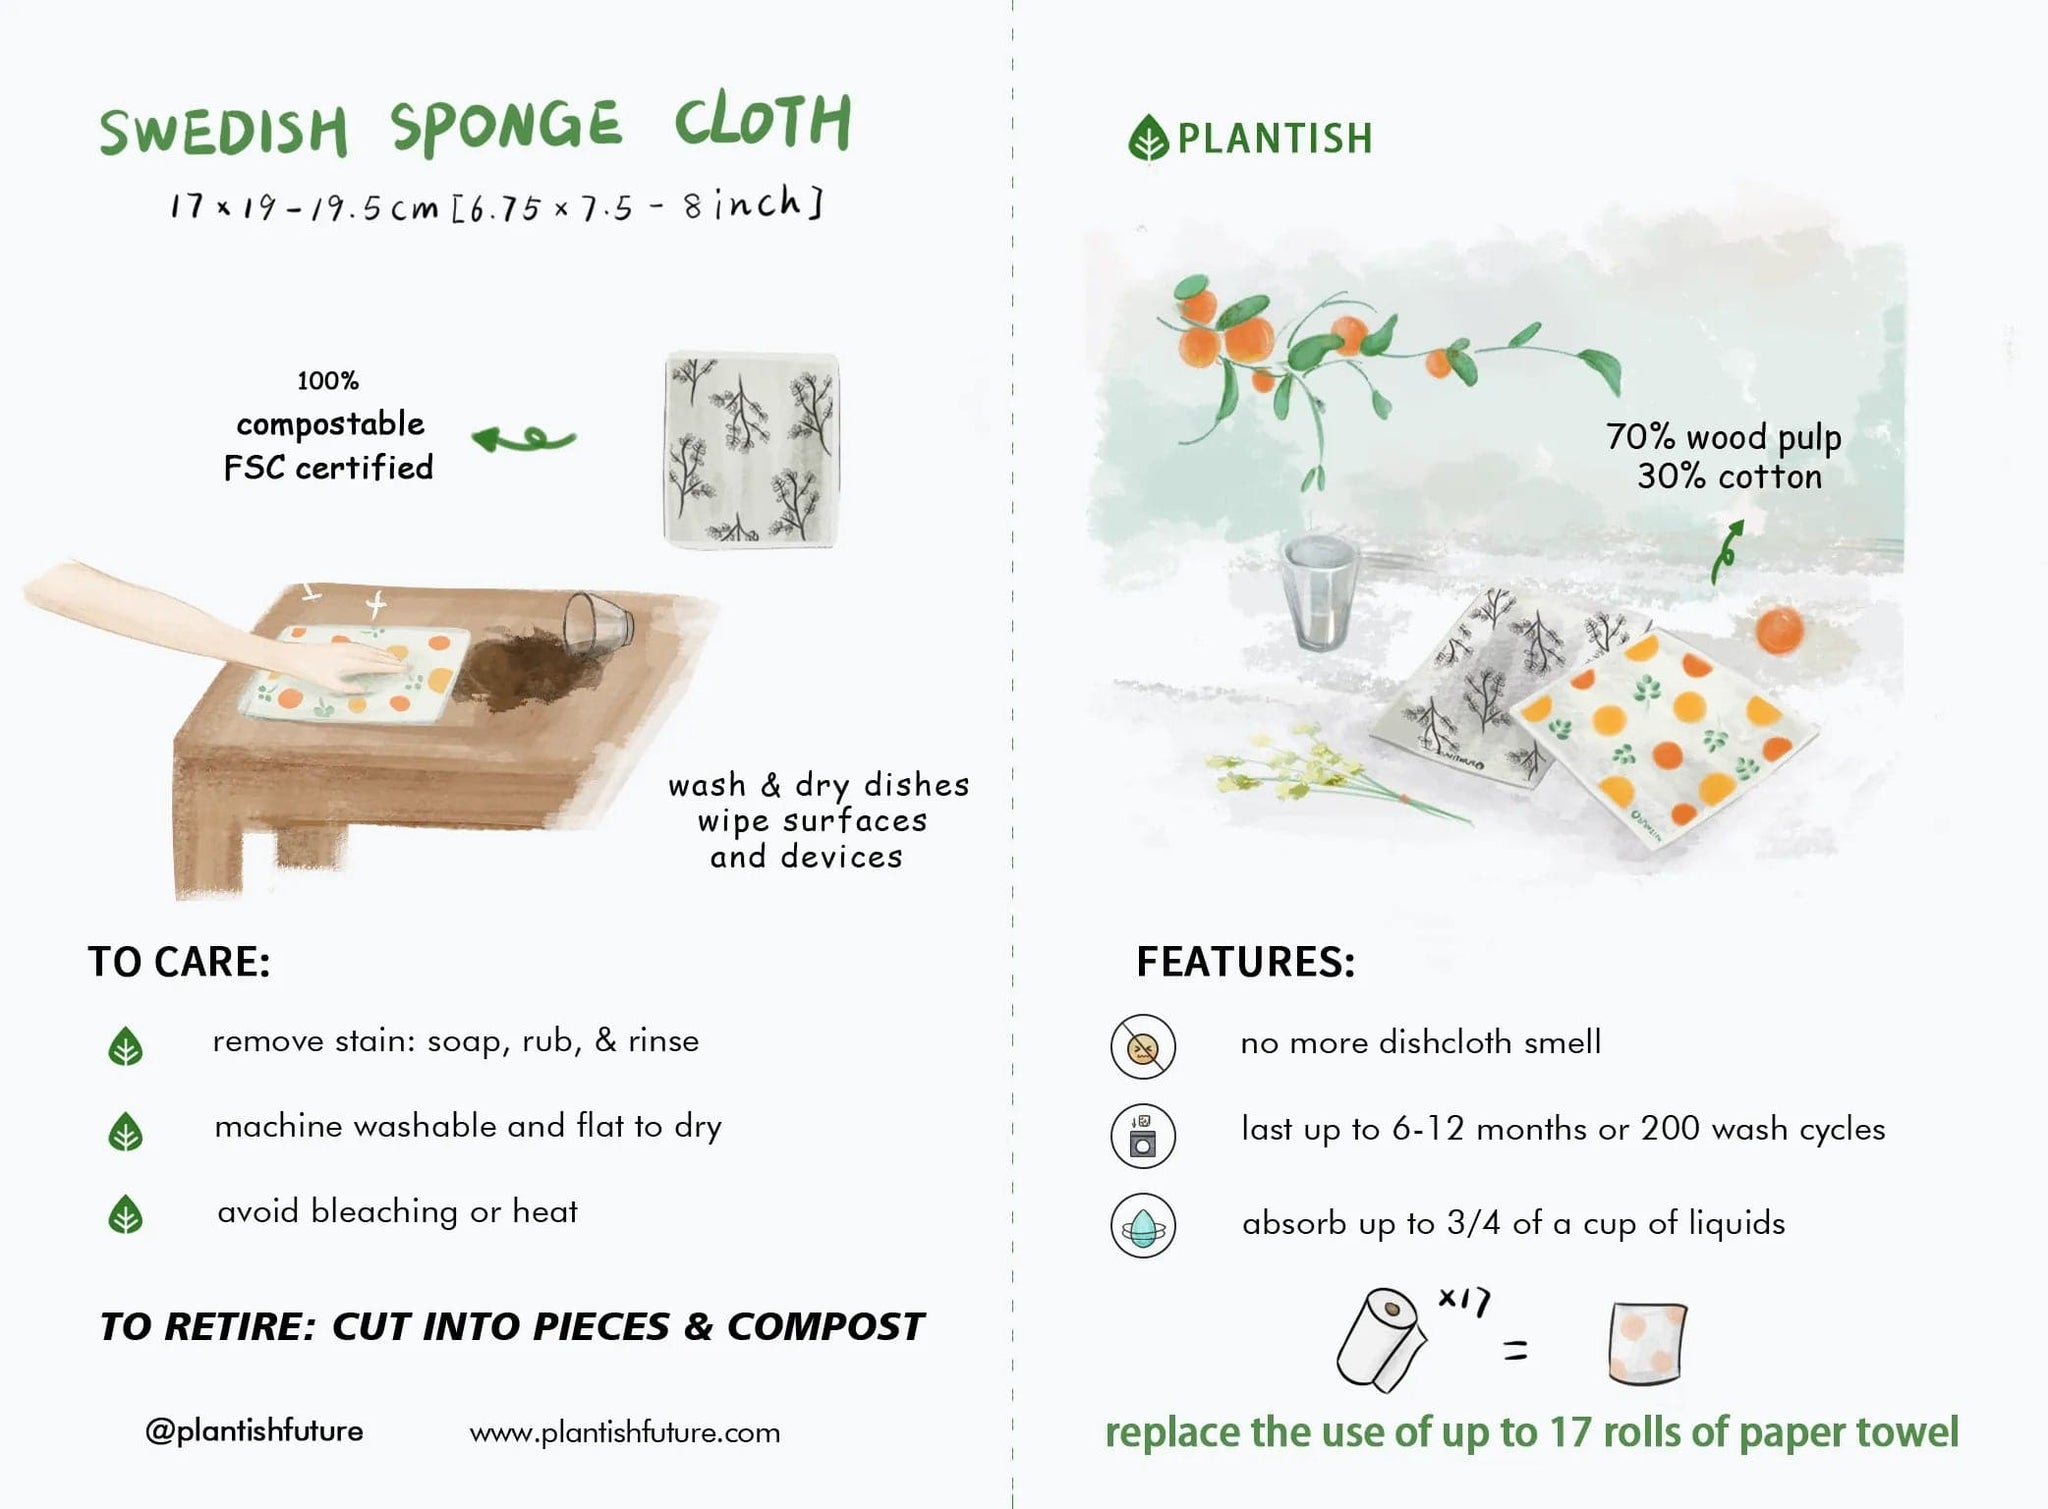 Reusable dishcloth care tips. Made with wood pulp and cotton, making it 100% compostable, zero waste and plastic free!